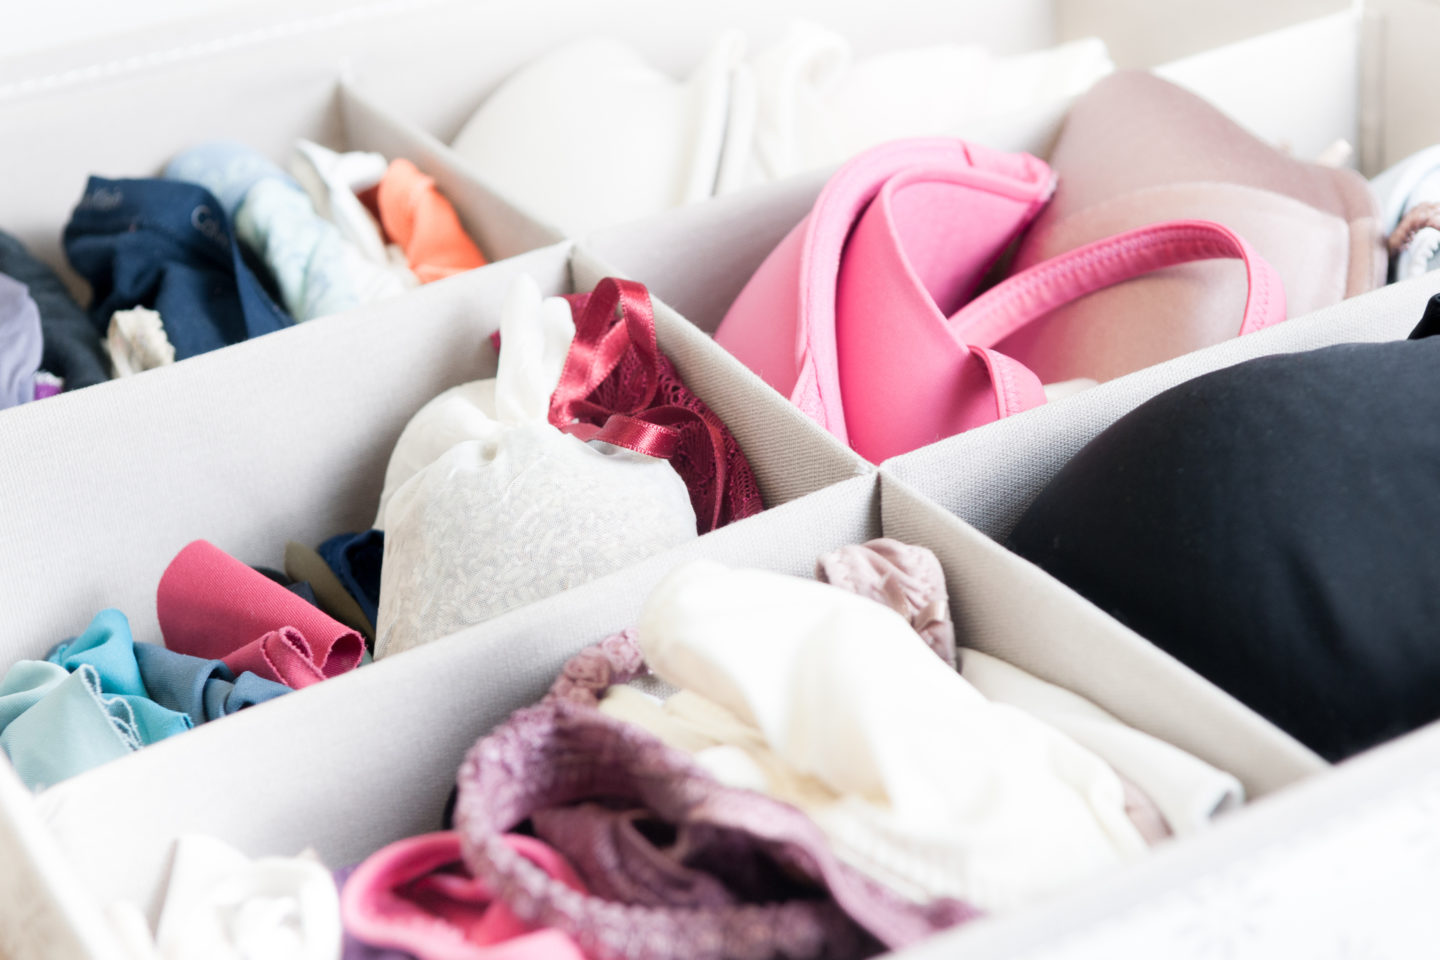 How Choosing The Right Underwear Each Day Can Keep You Infection-Free